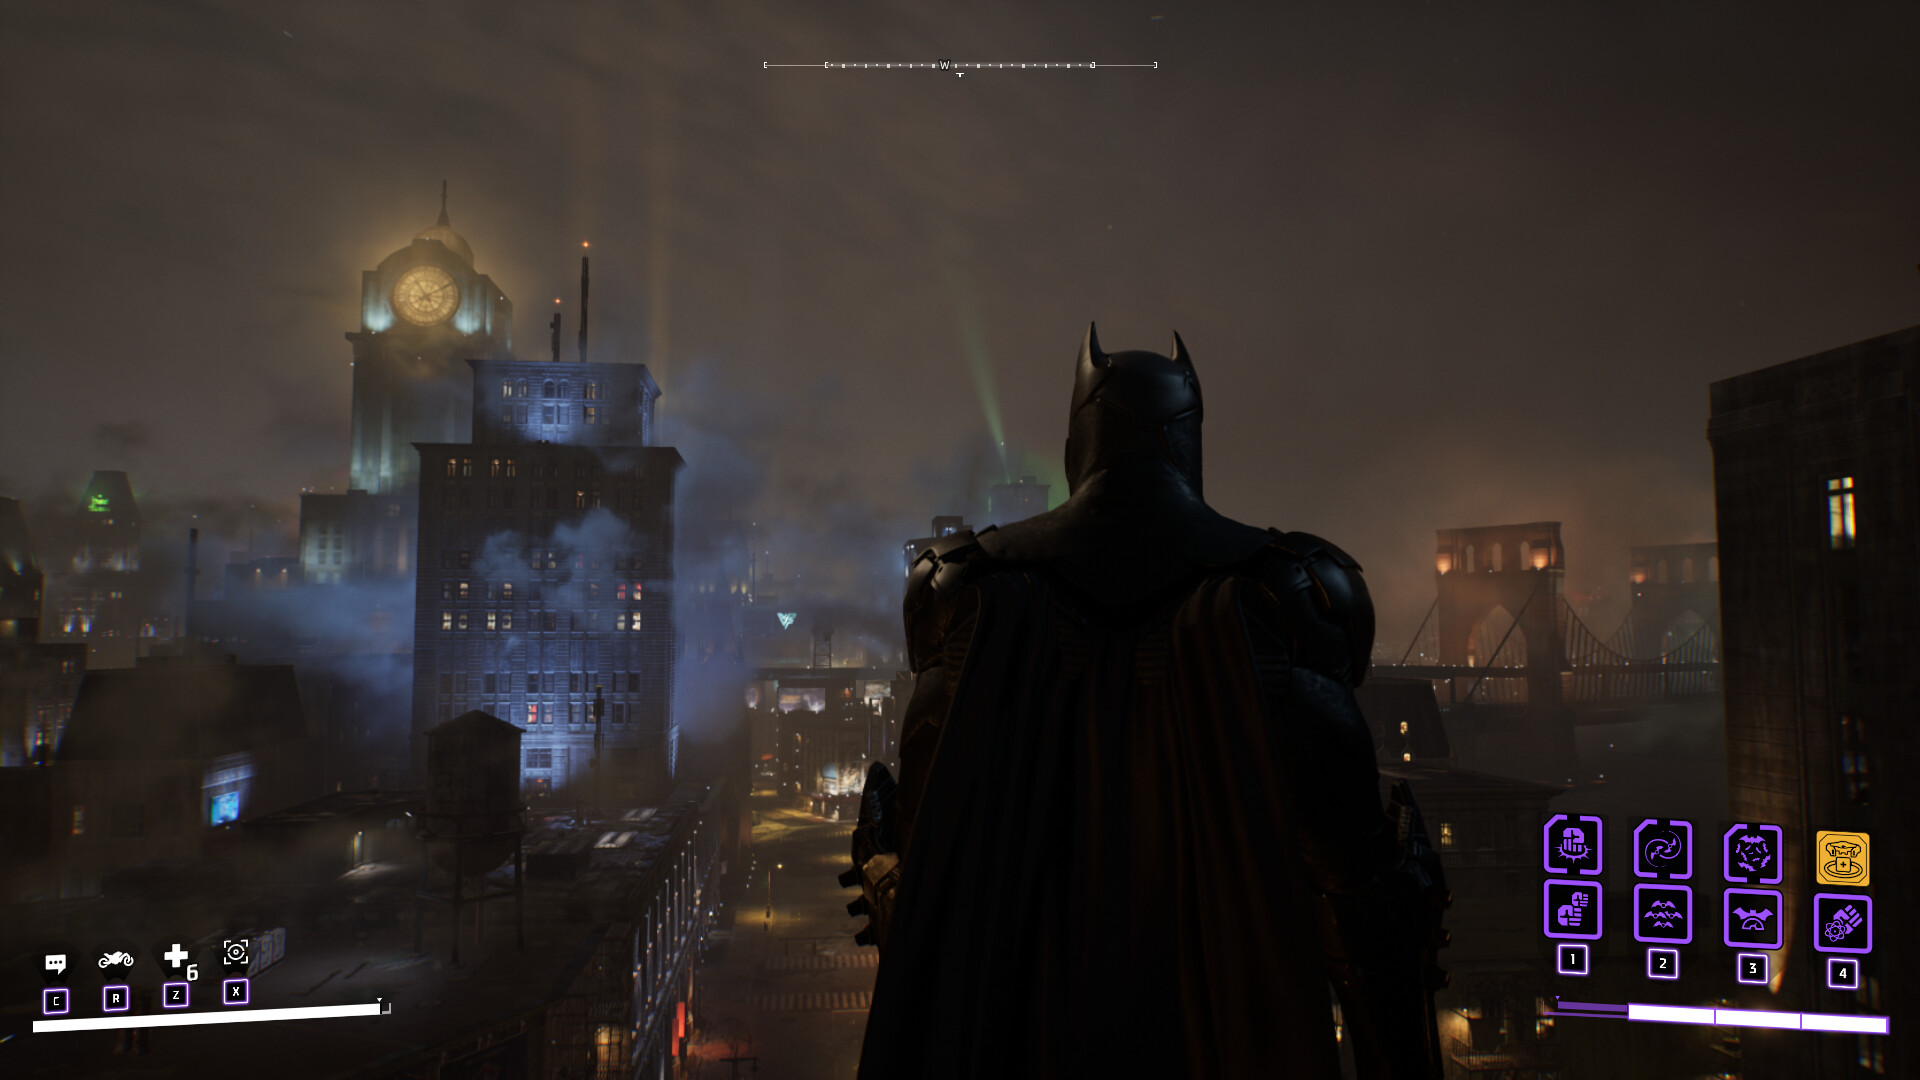 Gotham Knights Adds 2 New Game Modes For Free - Cinelinx